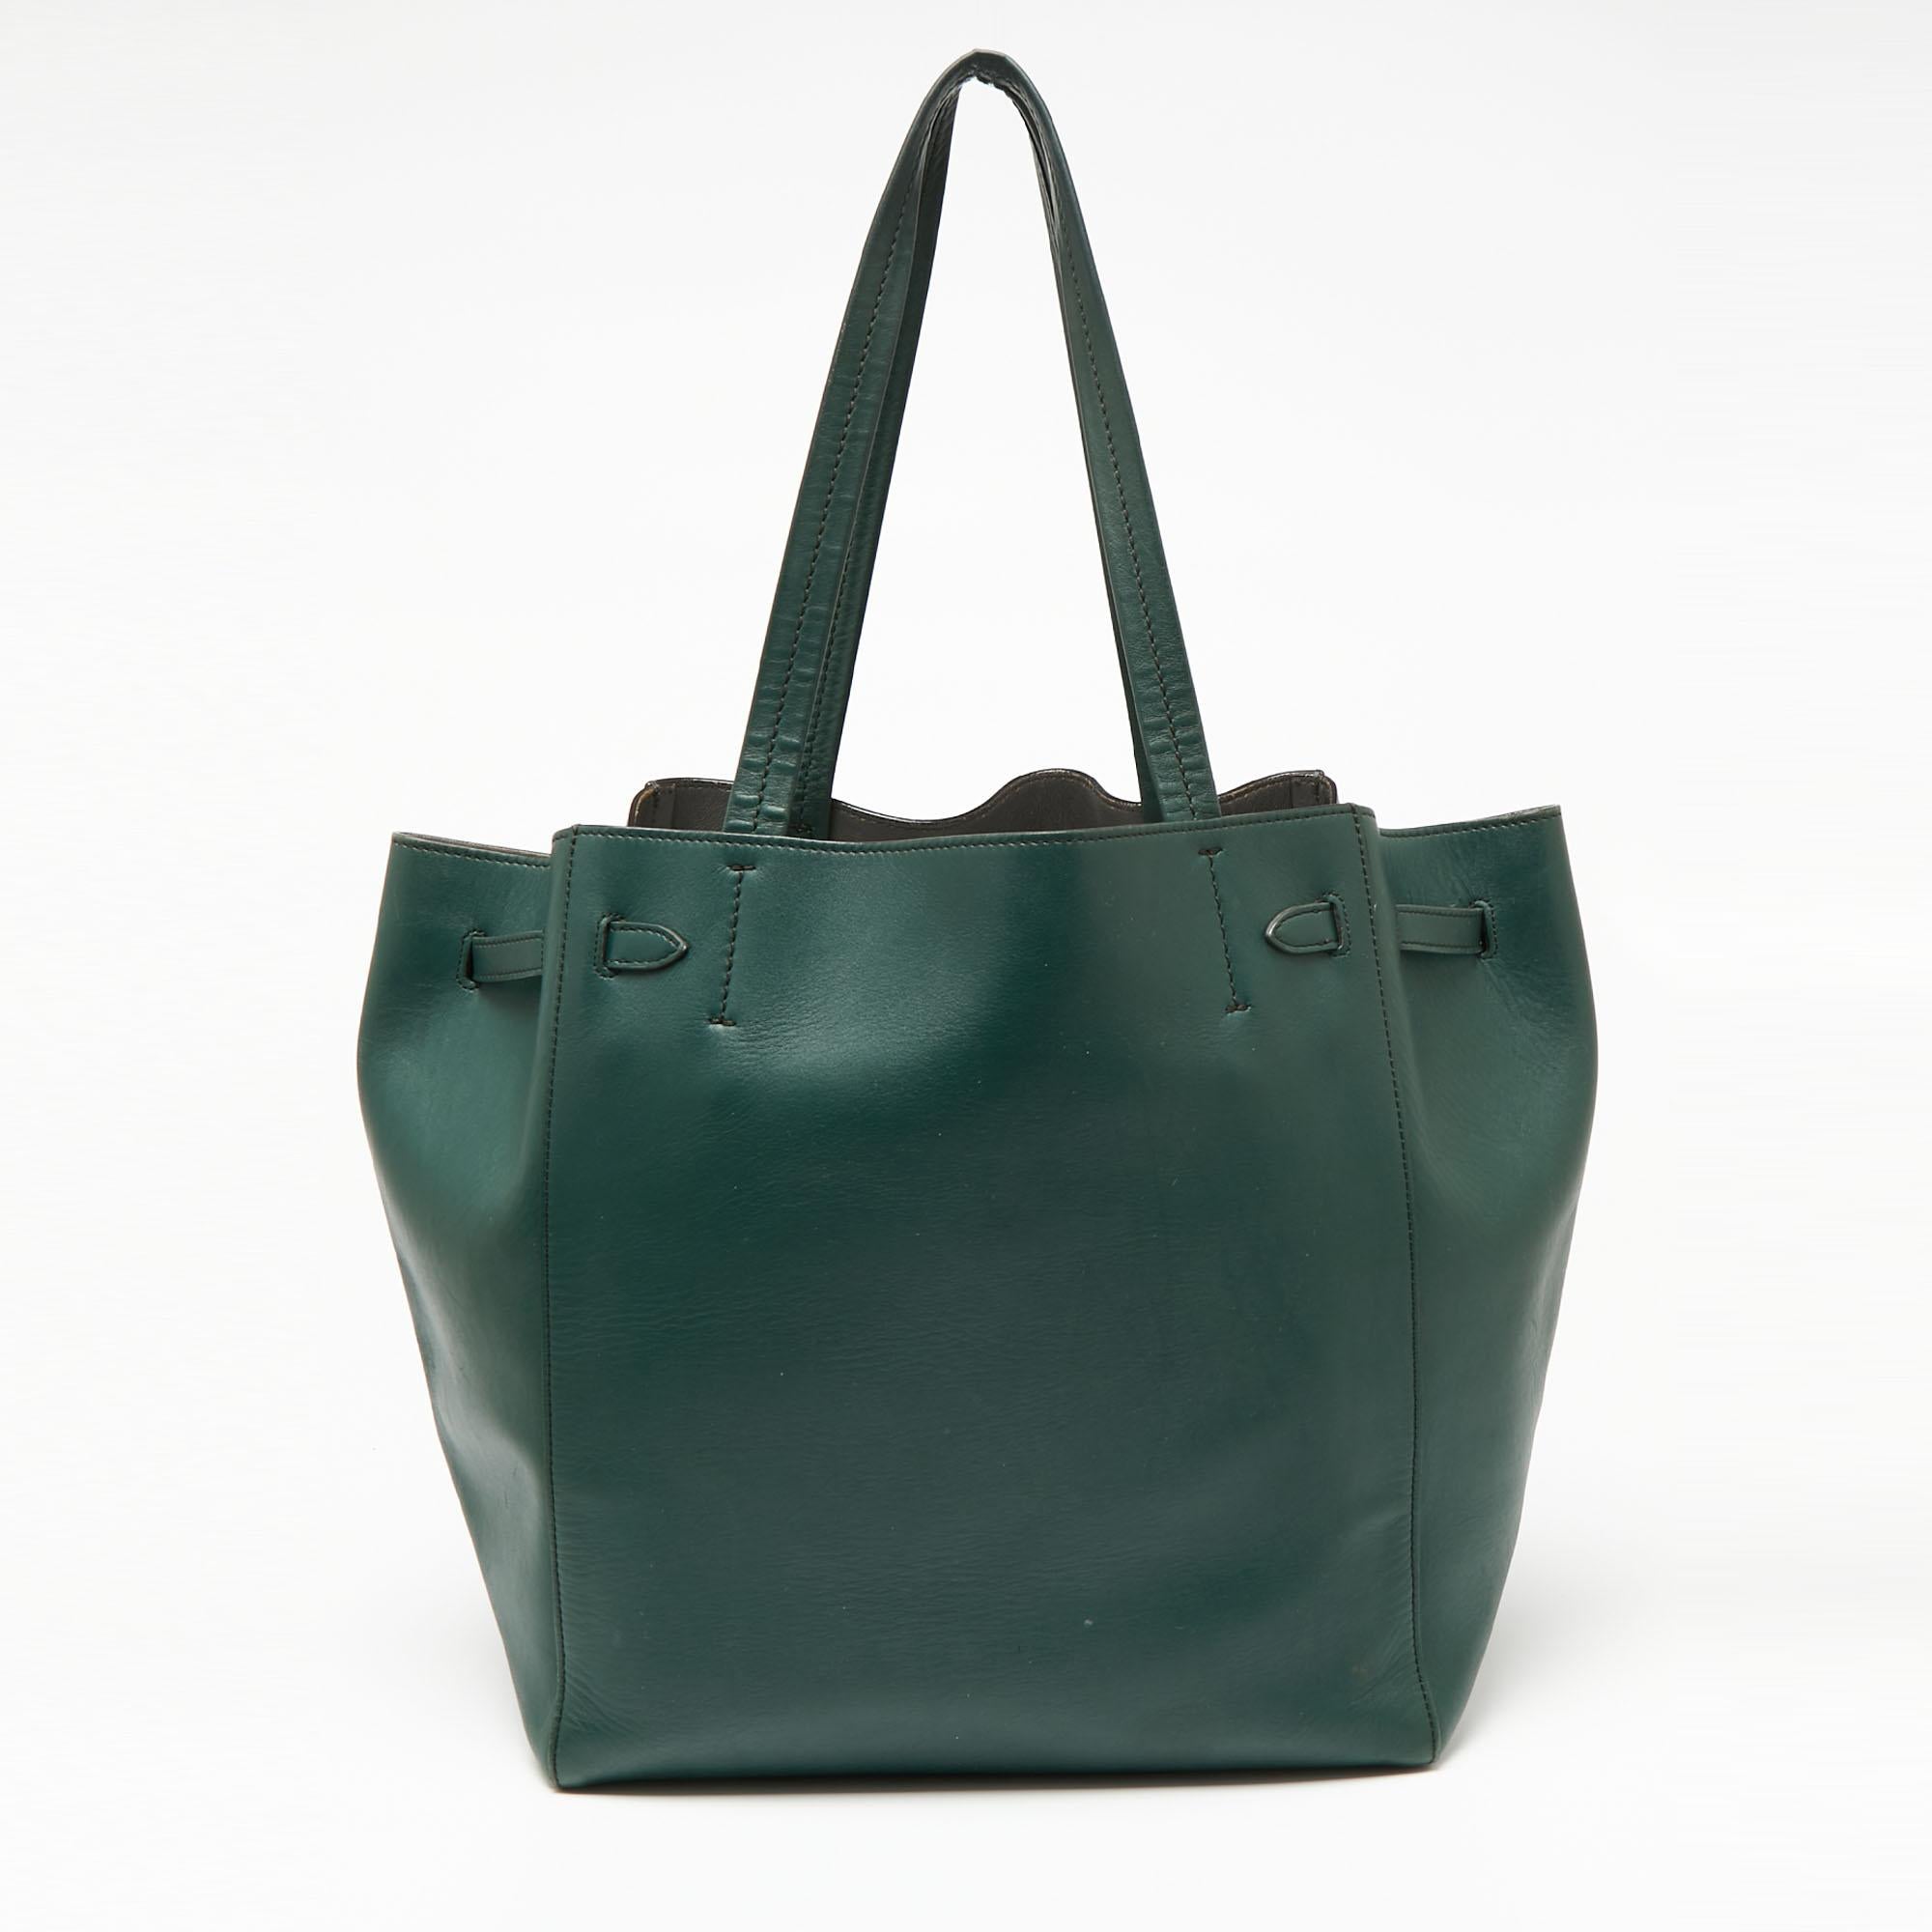 This Cabas Phantom tote is from one of the most loved collections from Céline. This tote serves as a fine alternative to carrying all your belongings. Its exterior is in a green tone leather with a tie detail and two handles on top.

